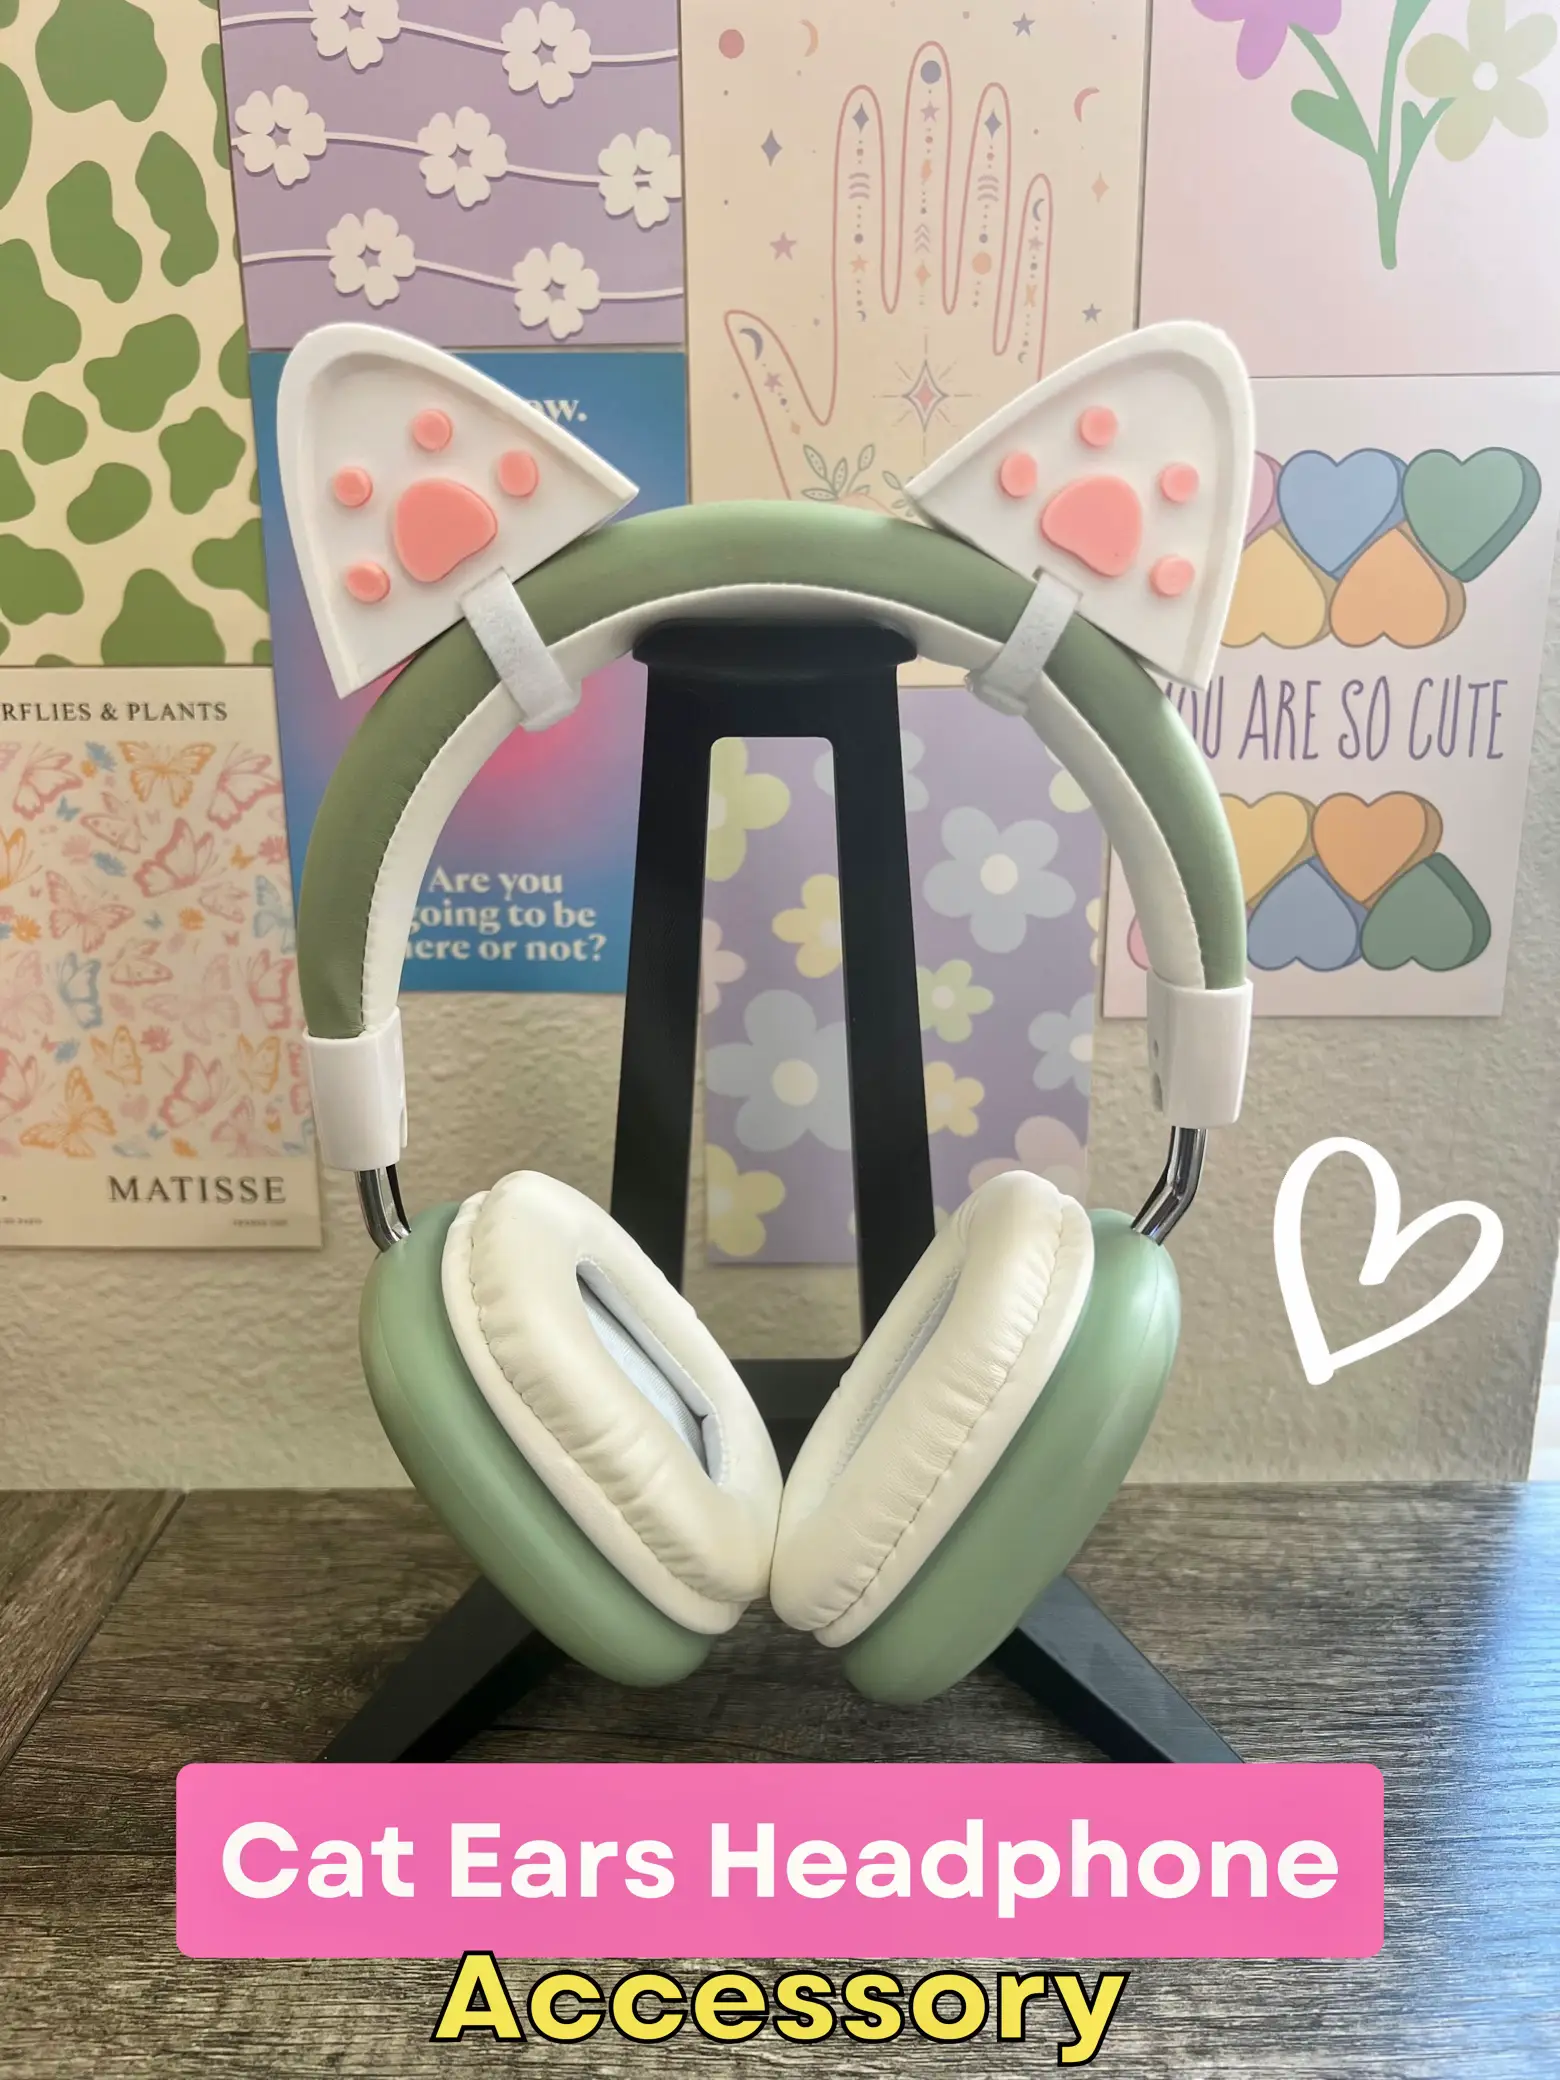 i love #stickers #foryou #headphones #sony #fyp